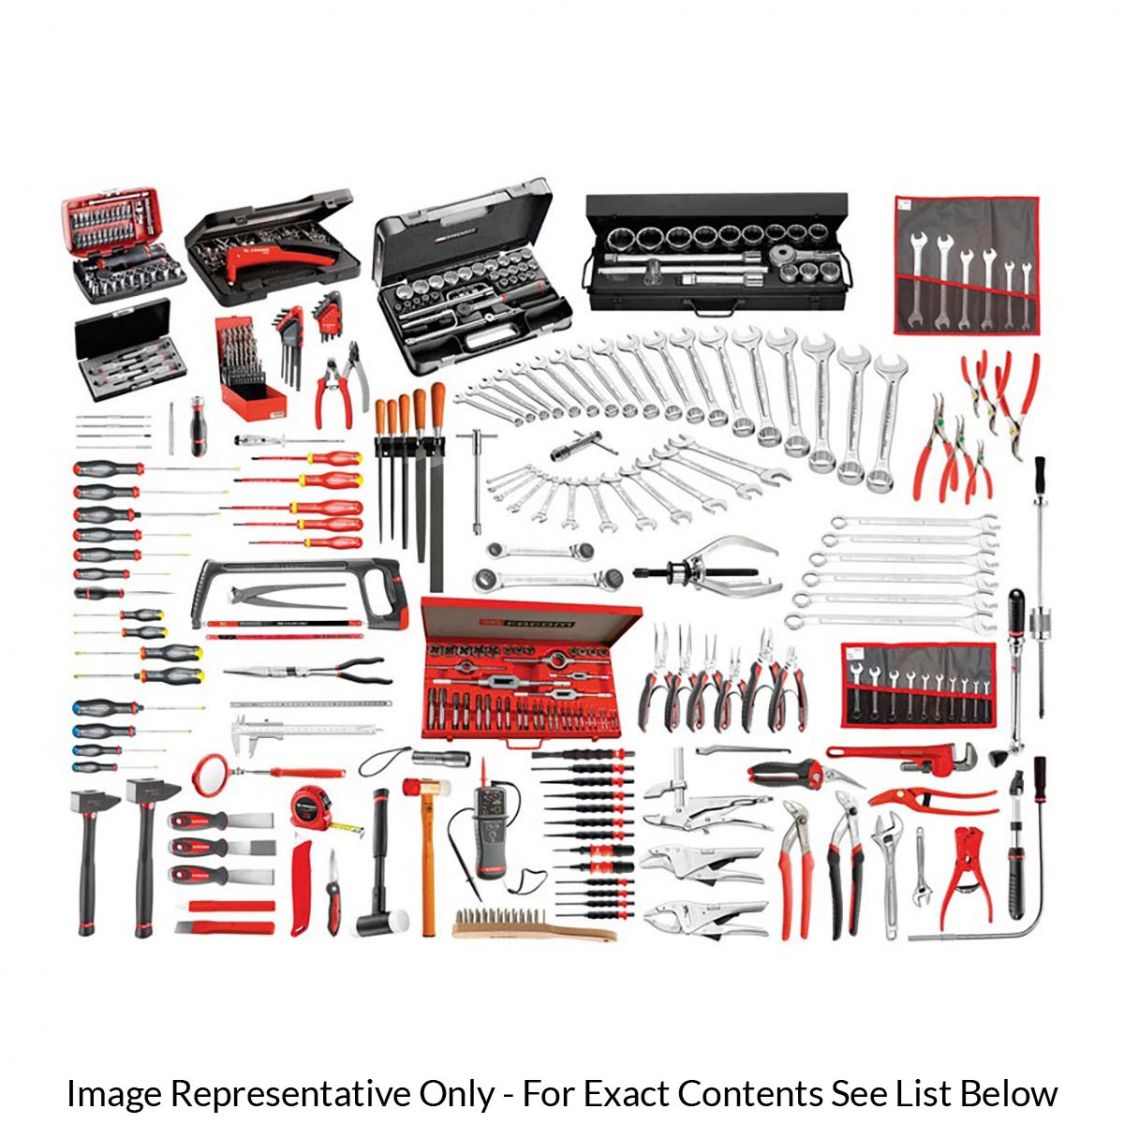 FACOM 2000.BBM150A - 333pc General Metric Tool Kit + Work Bench + Wall Cabinet